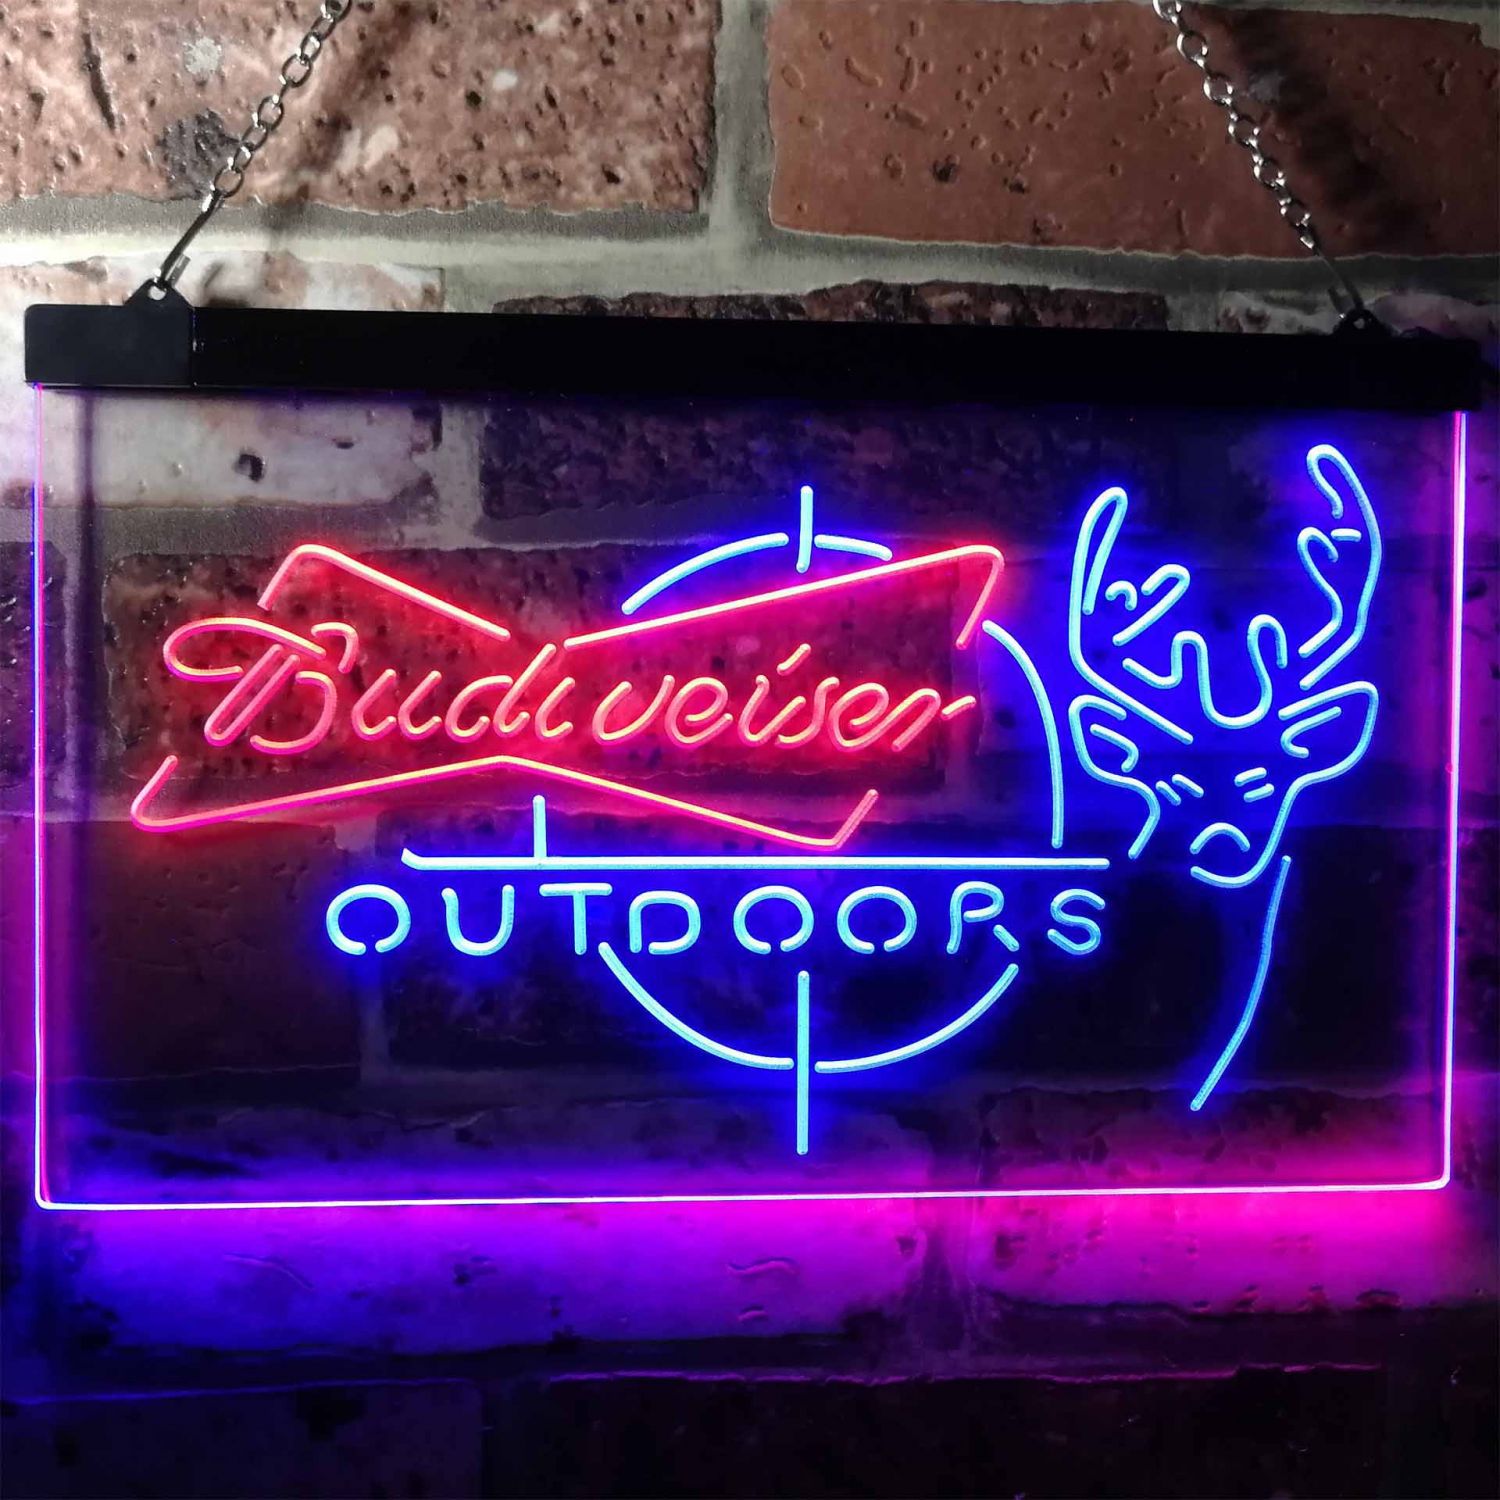 Budweiser Outdoors LED Neon Sign - neon sign - LED sign - shop - What's ...